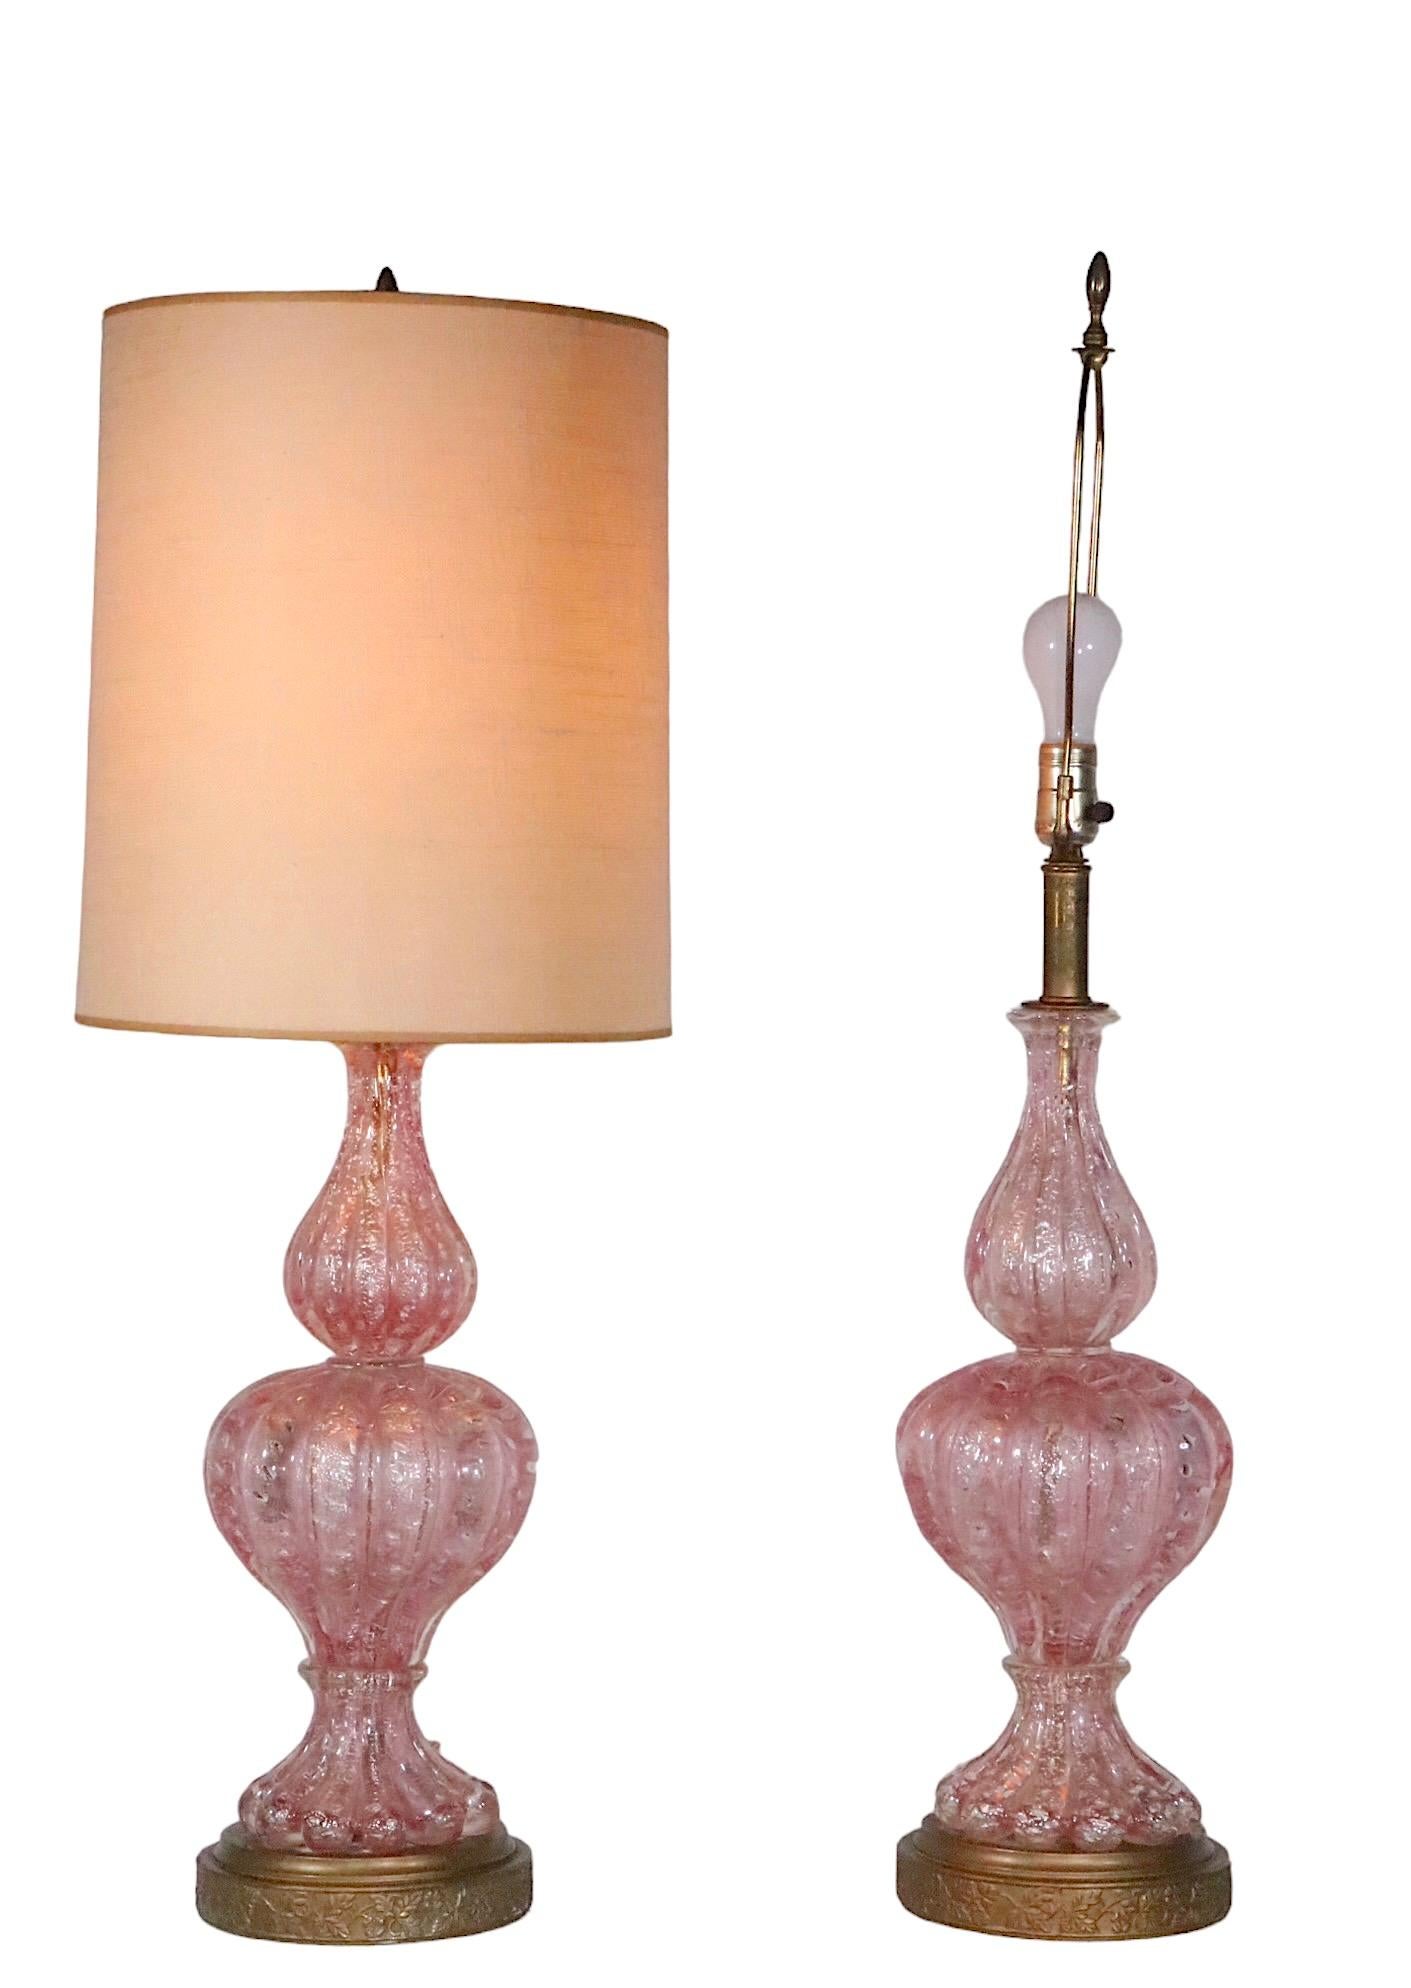 Spectacular pair of Art Glass table lamps, made in Murano, Italy, circa 1950’s, attributed to Barovier.
 The lamps feature internal  controlled bubbles, encased in clear and pink glass with silver foil fragments. 
Voguish, sophisticated lamps, in